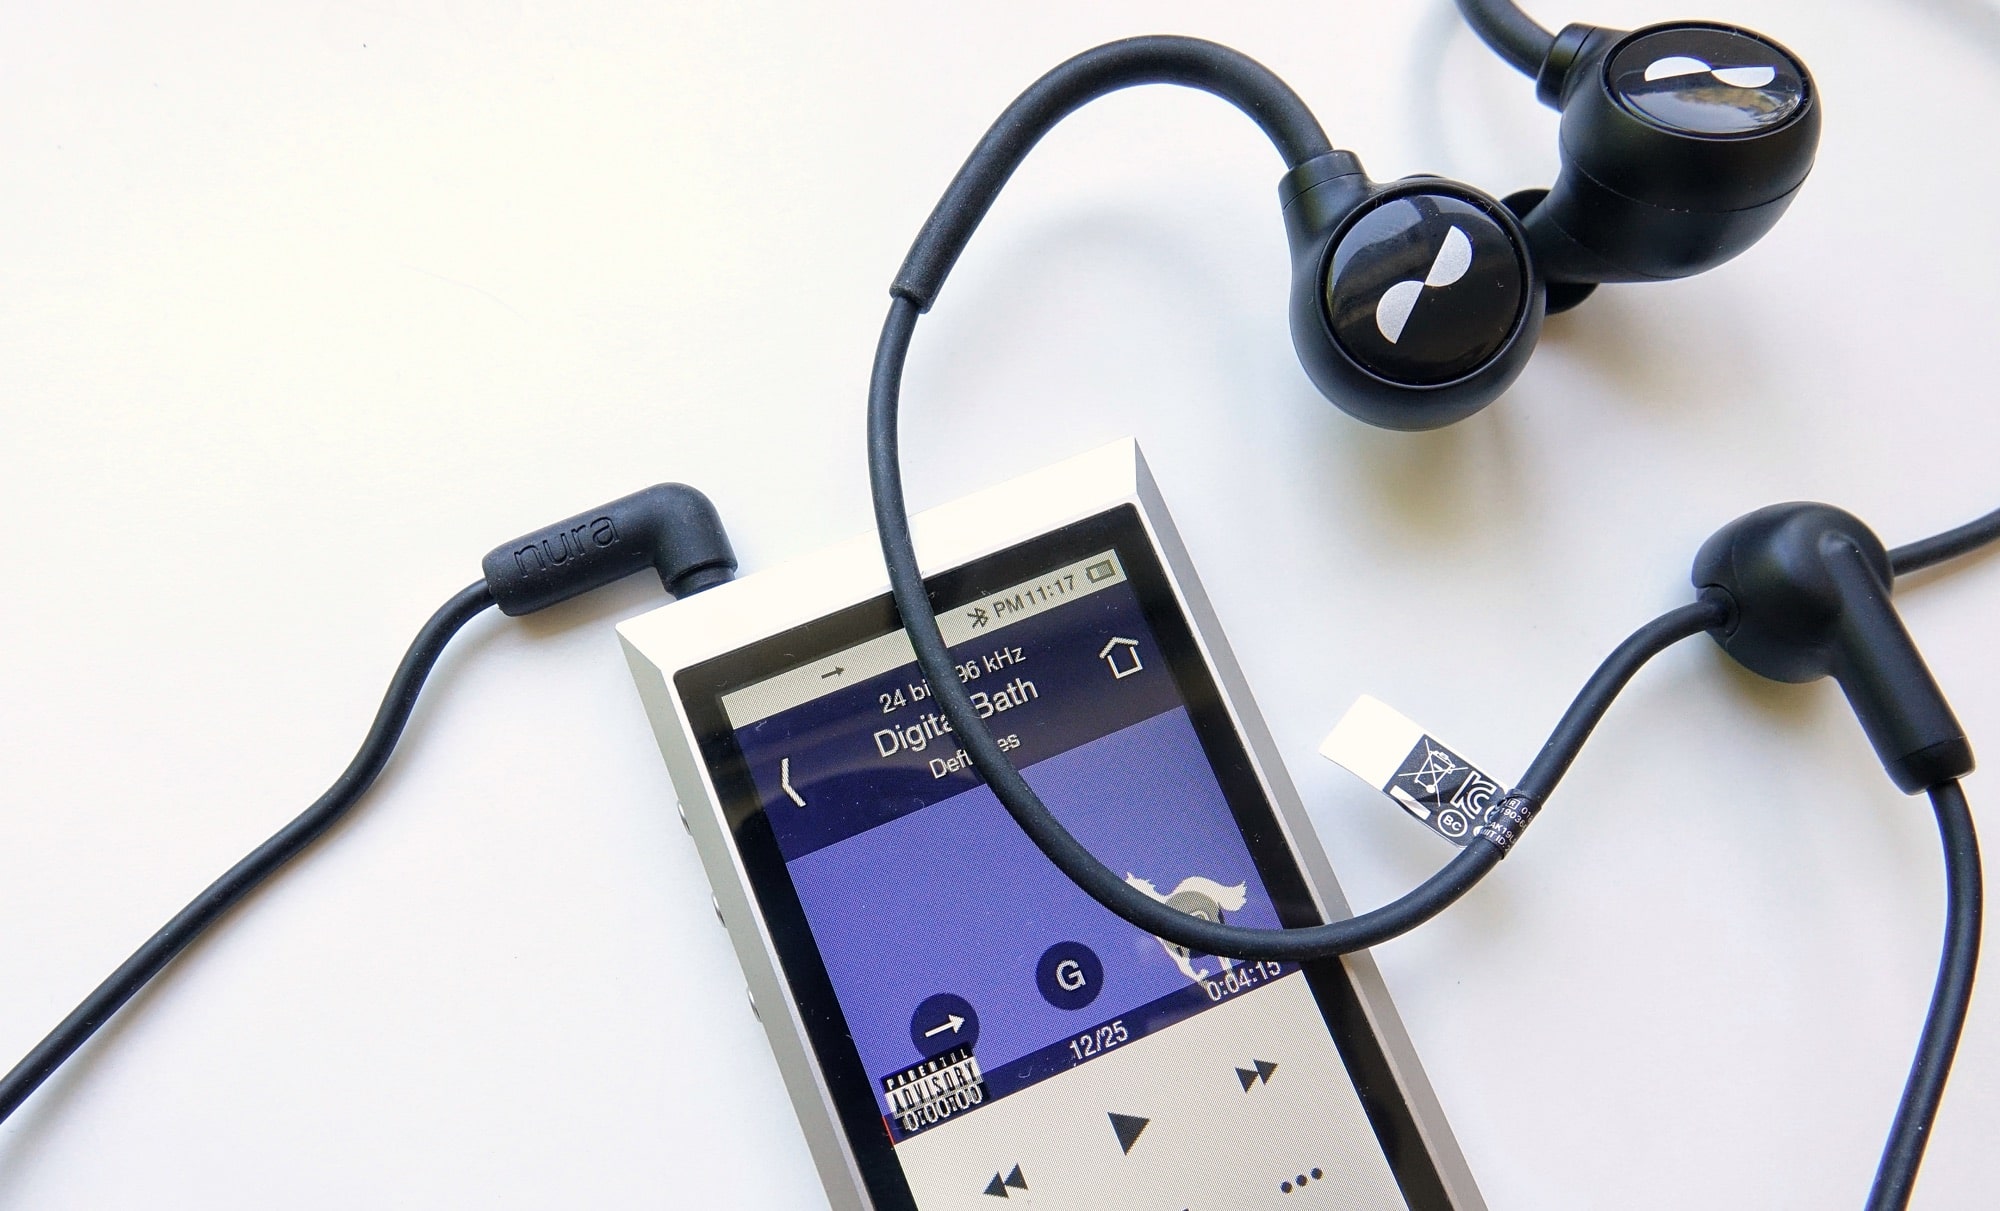 Nuraloop plugged into an Astell & Kern media player using the analog cable